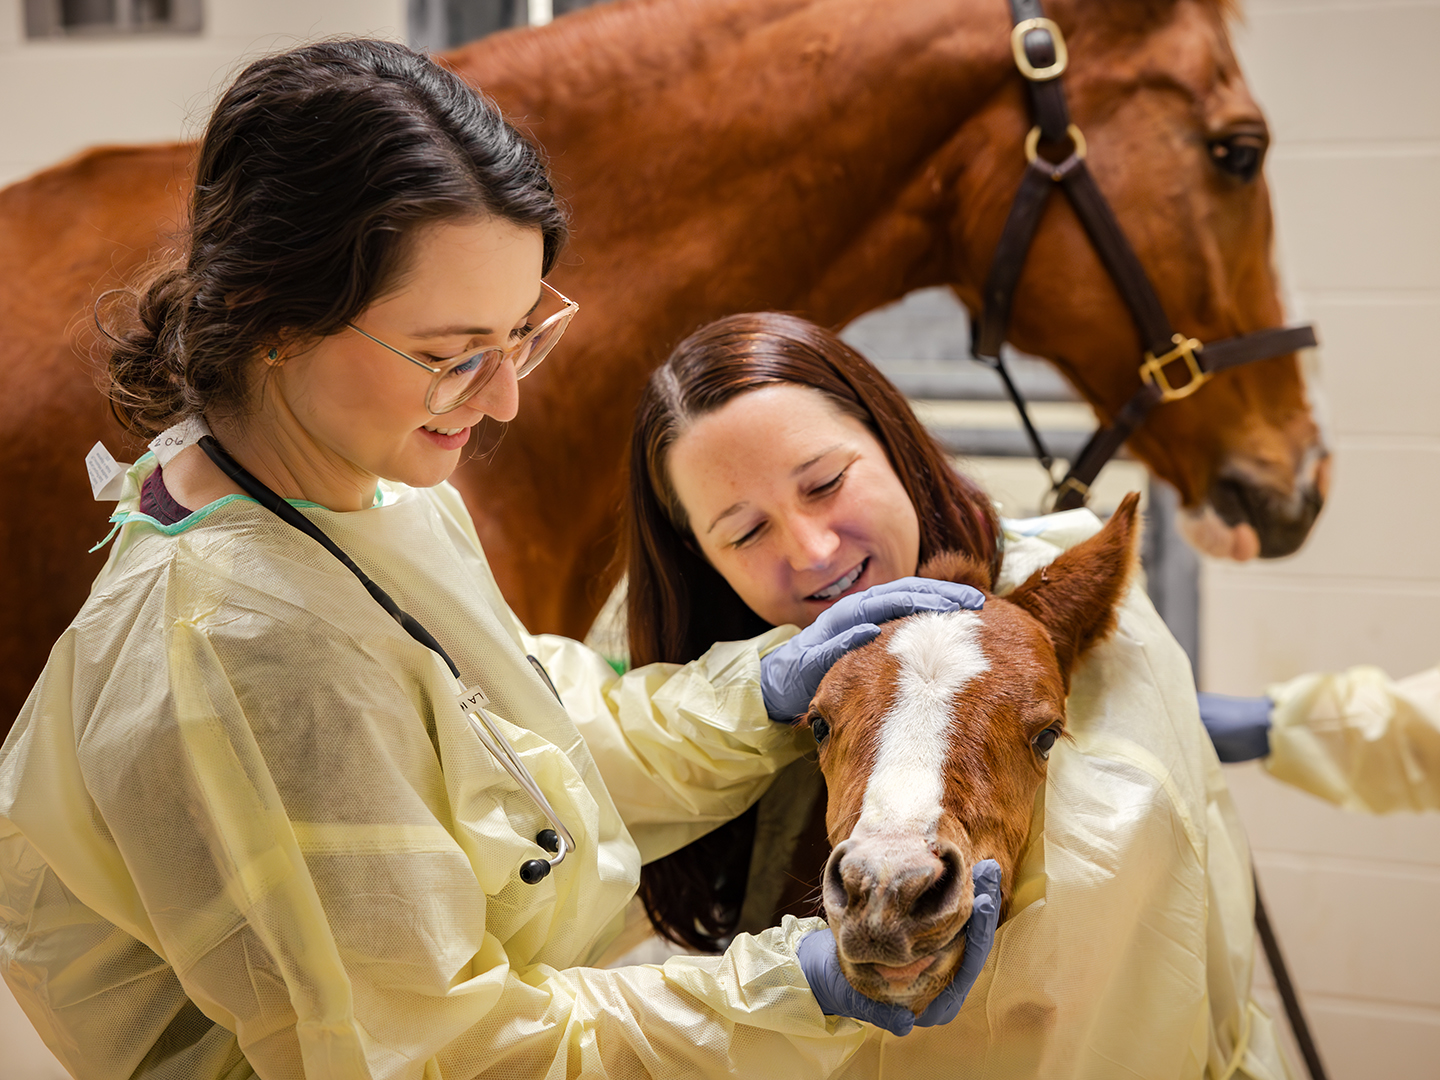 Two veterinarians in scrubs examine a brown foal